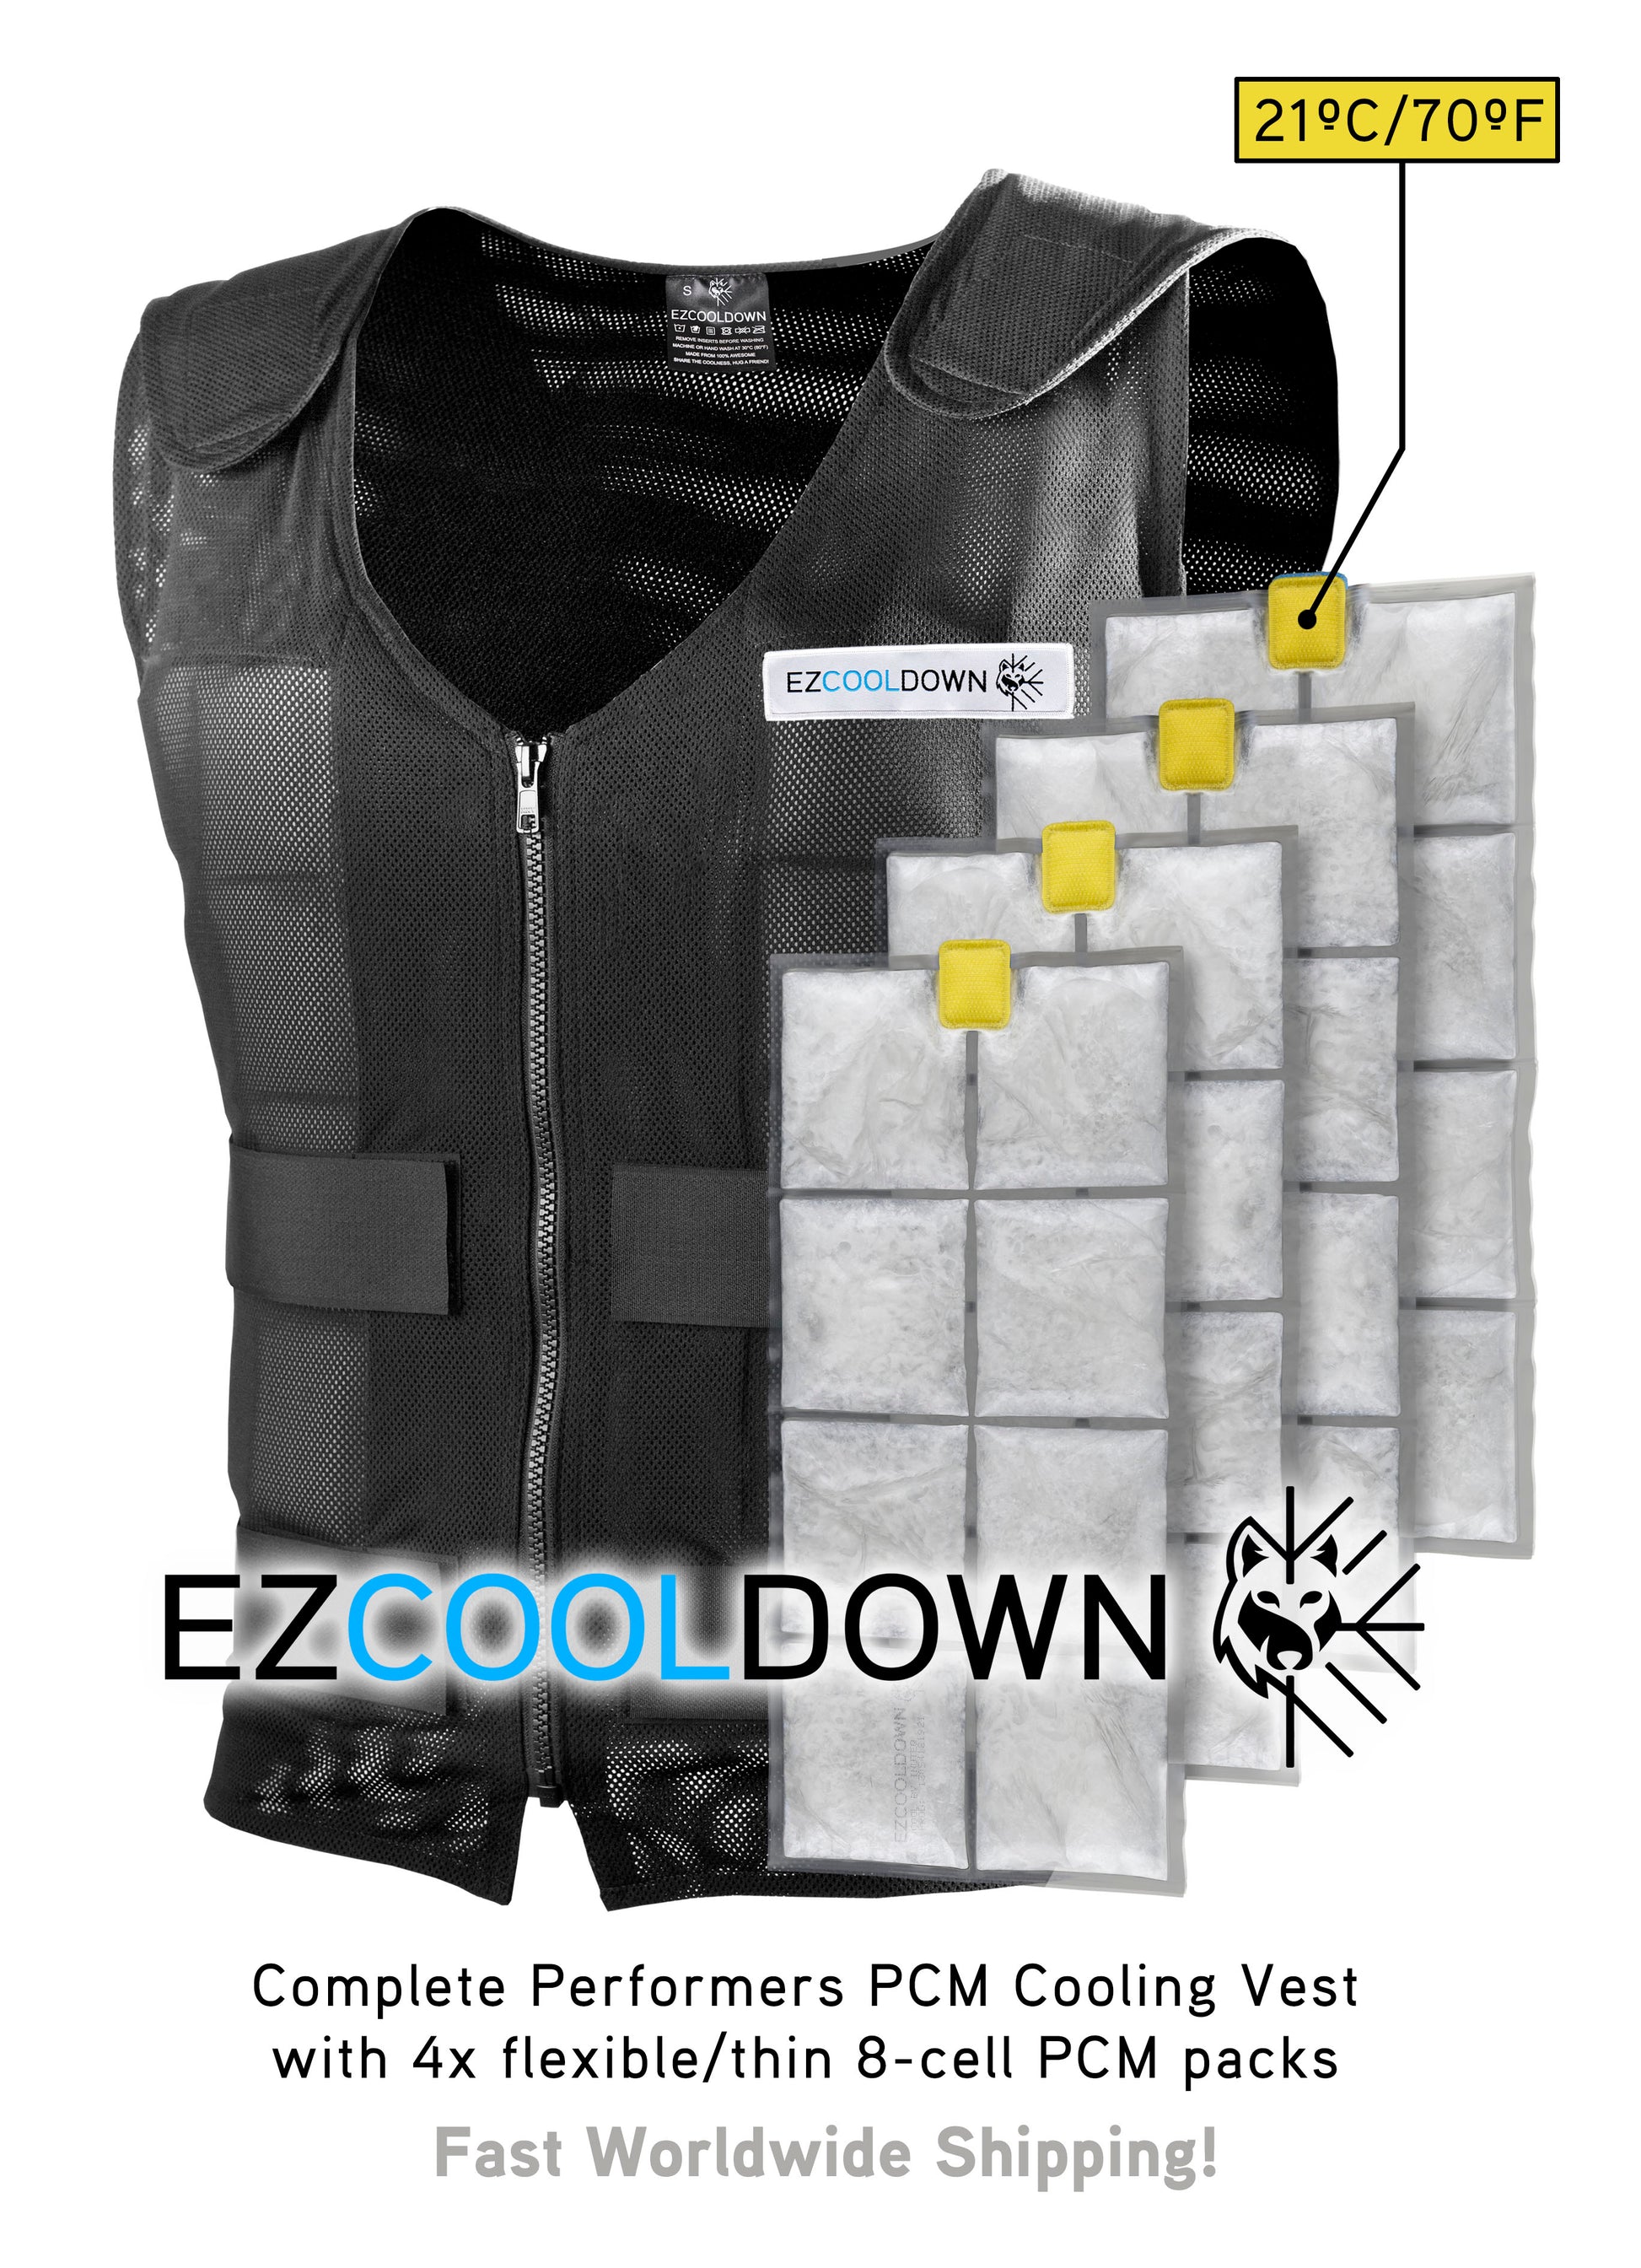 The Best Cooling Vest for Workers